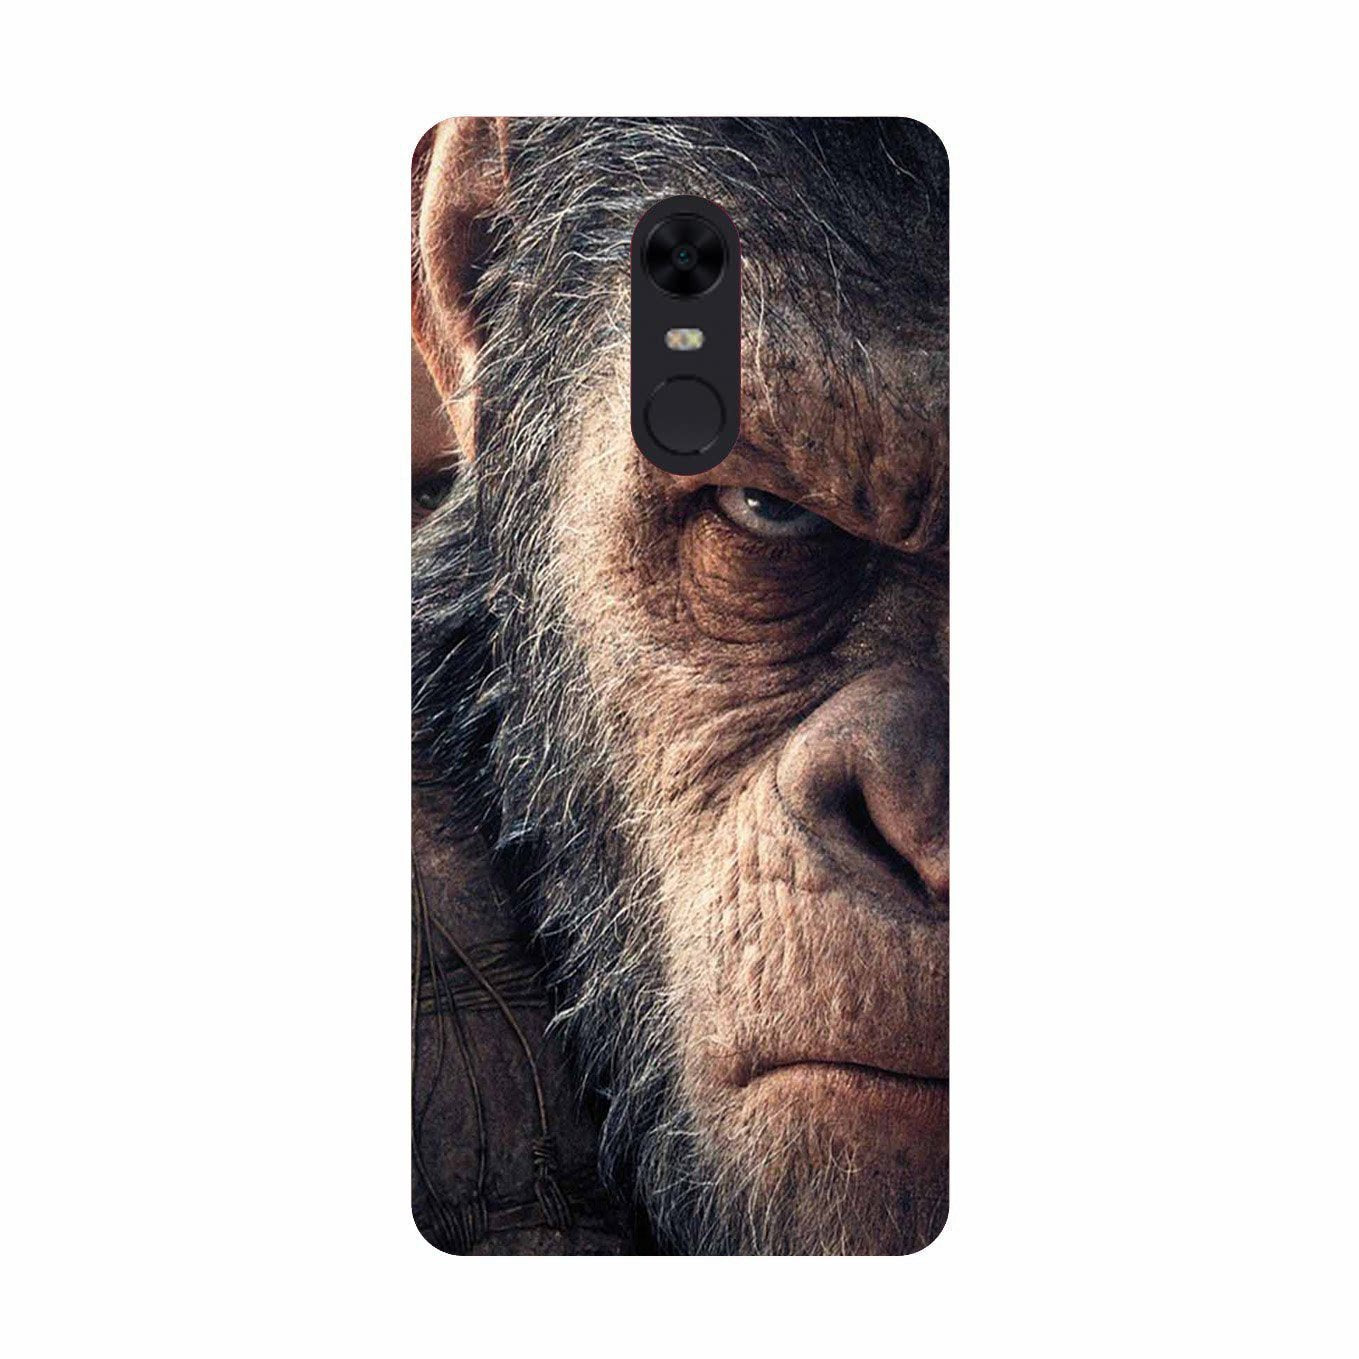 Angry Ape Mobile Back Case for Redmi Note 4(Design - 316)